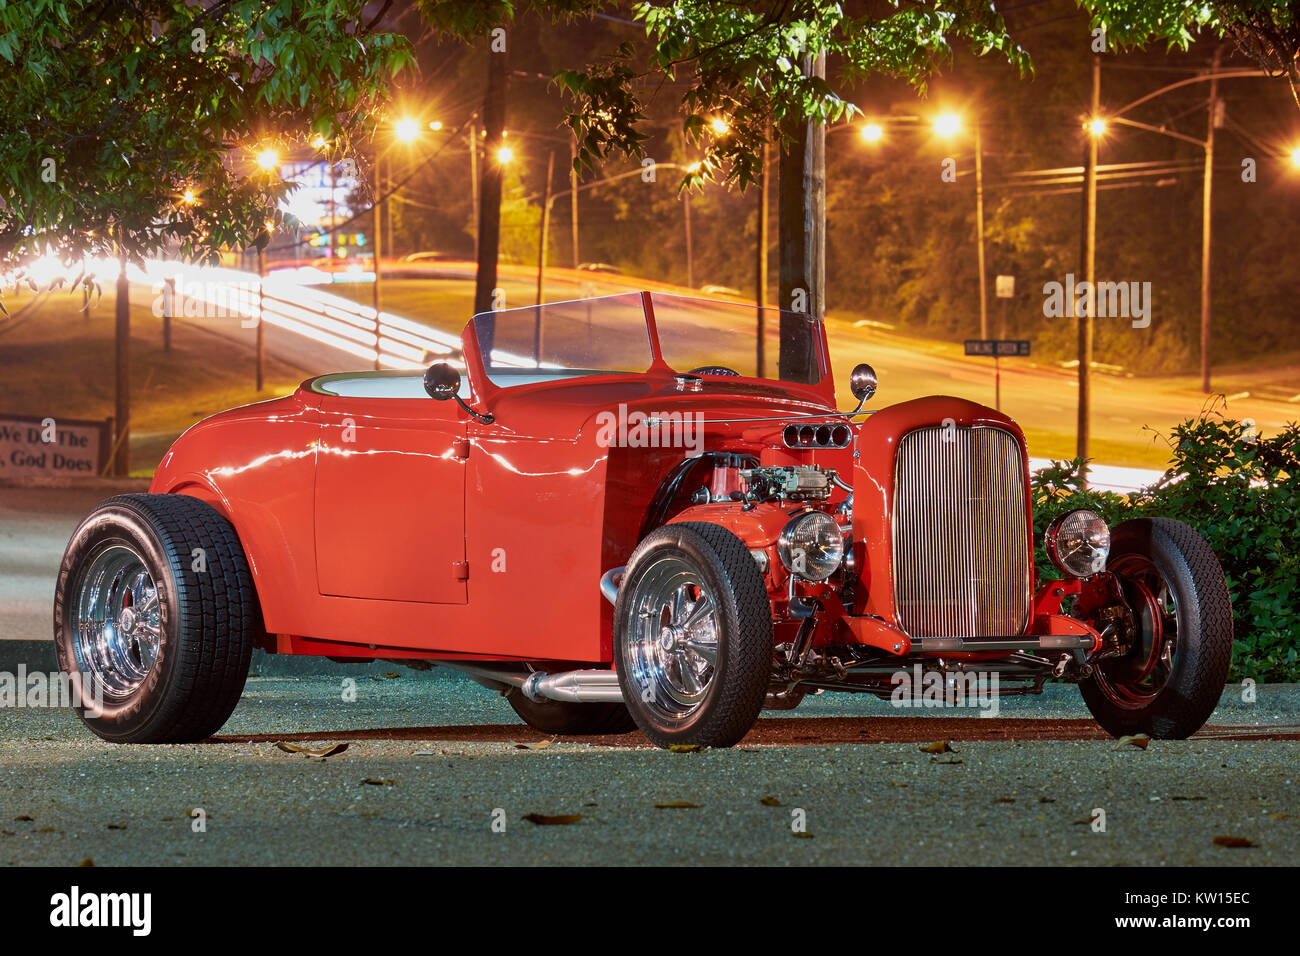 1932 red Ford hot rod roadster on side view display showing open engine compartment. Stock Photo